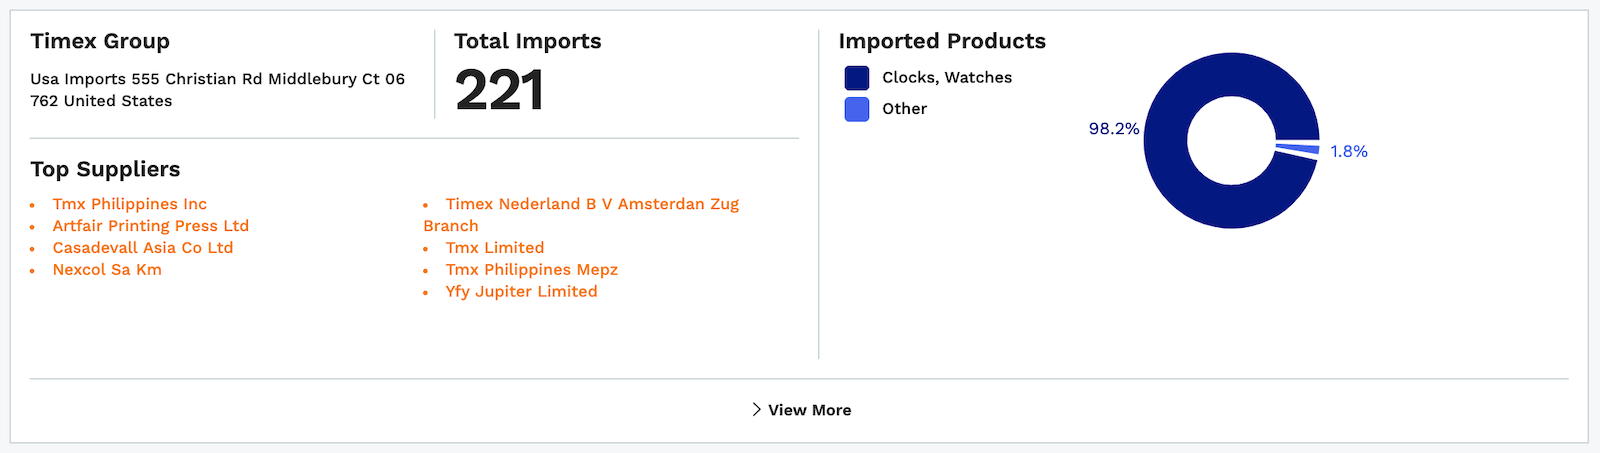 Timex imports from China